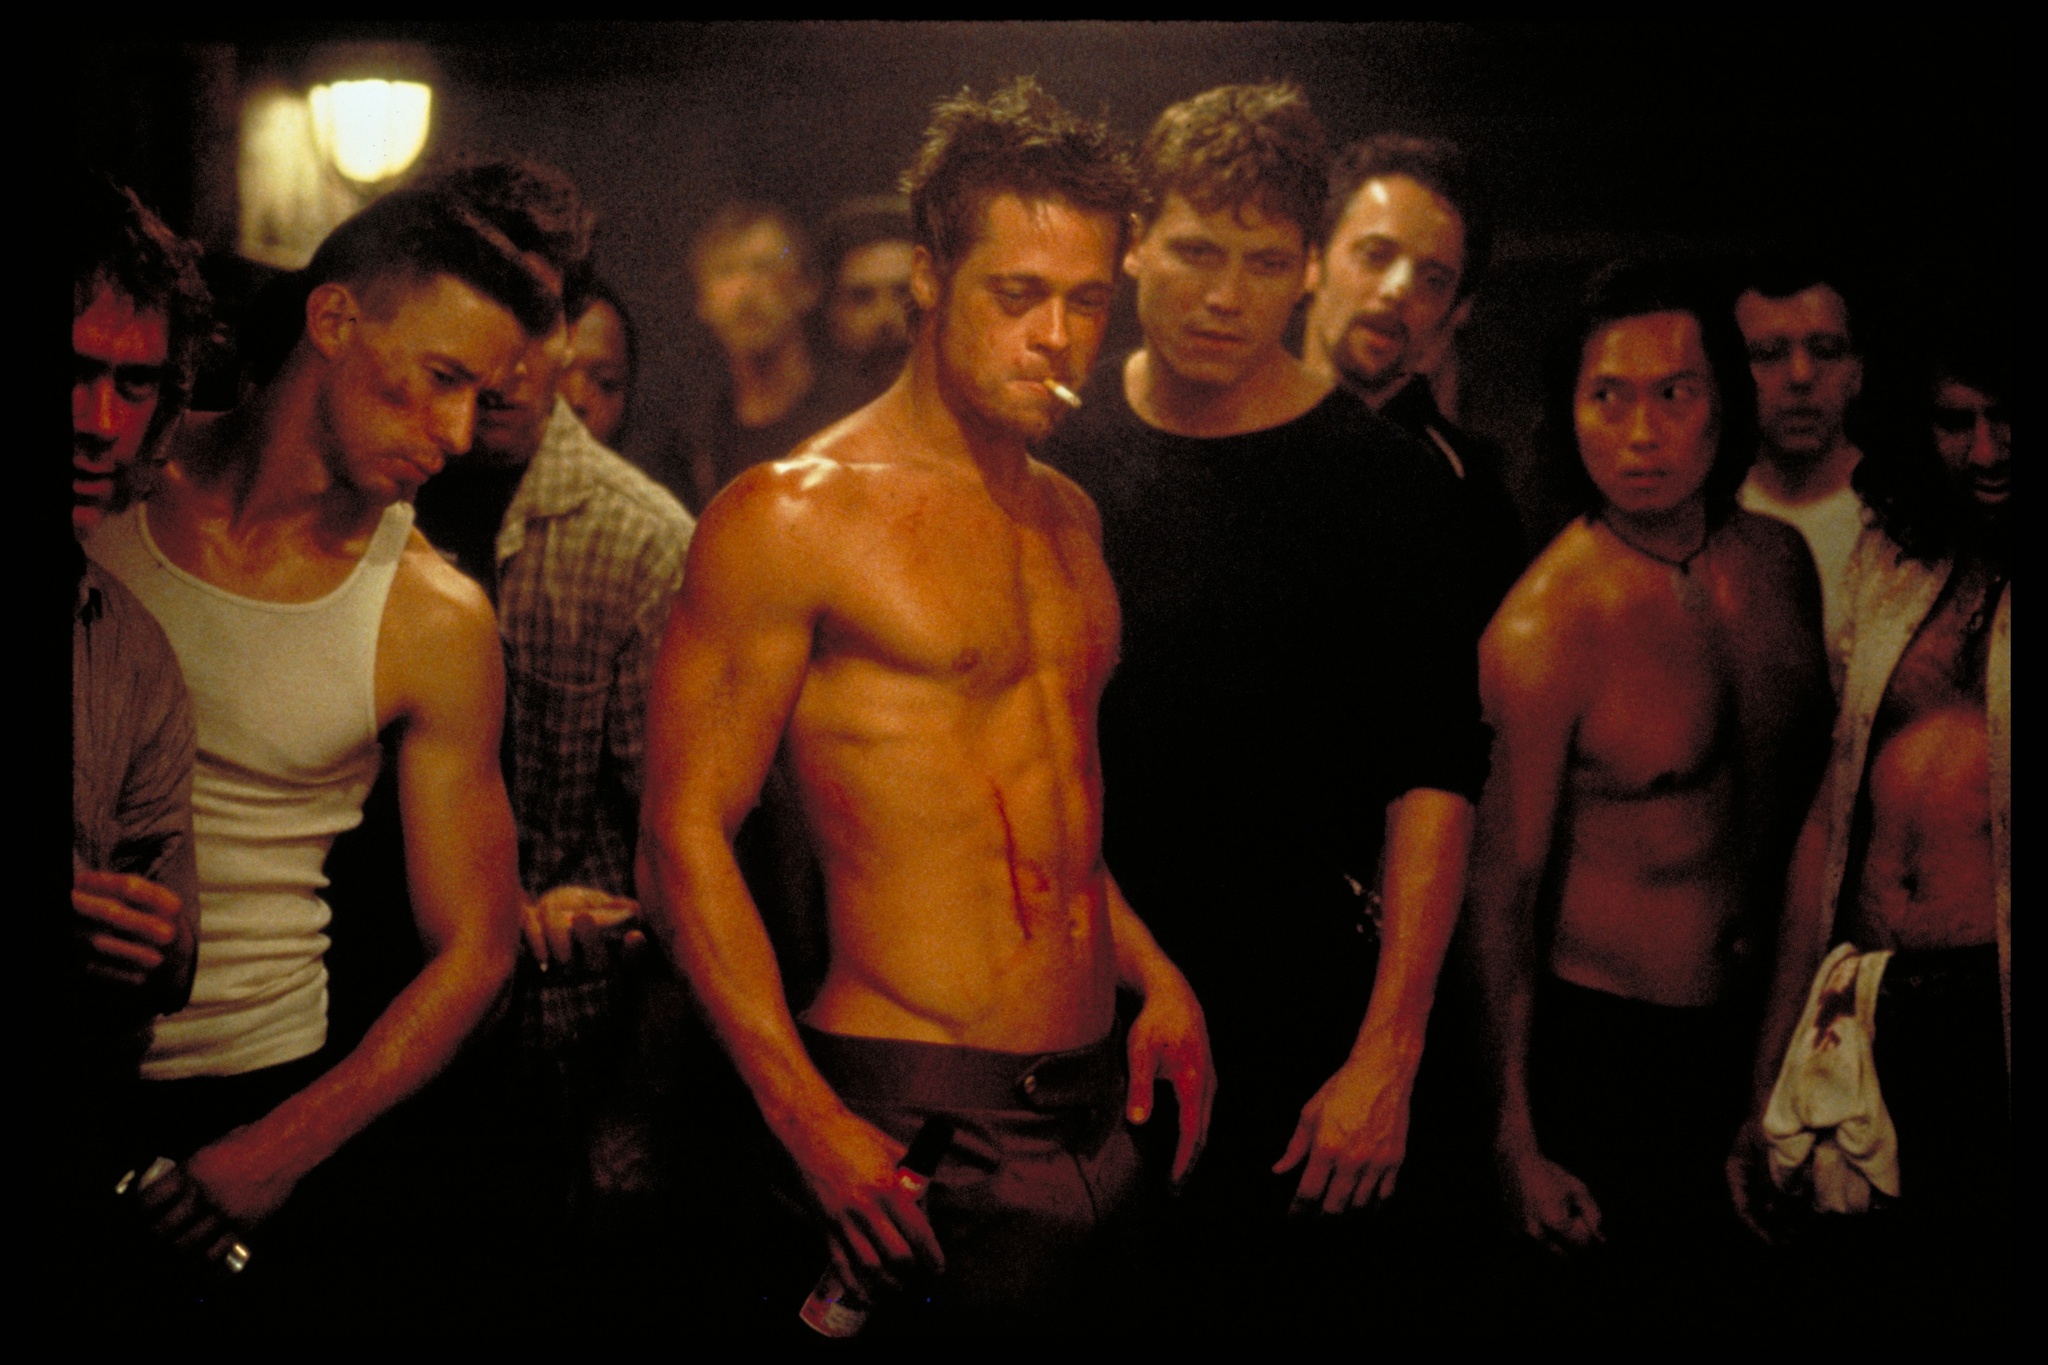 Brad Pitt, Joel Bissonnette, Paul Dillon, and Holt McCallany in Fight Club (1999)